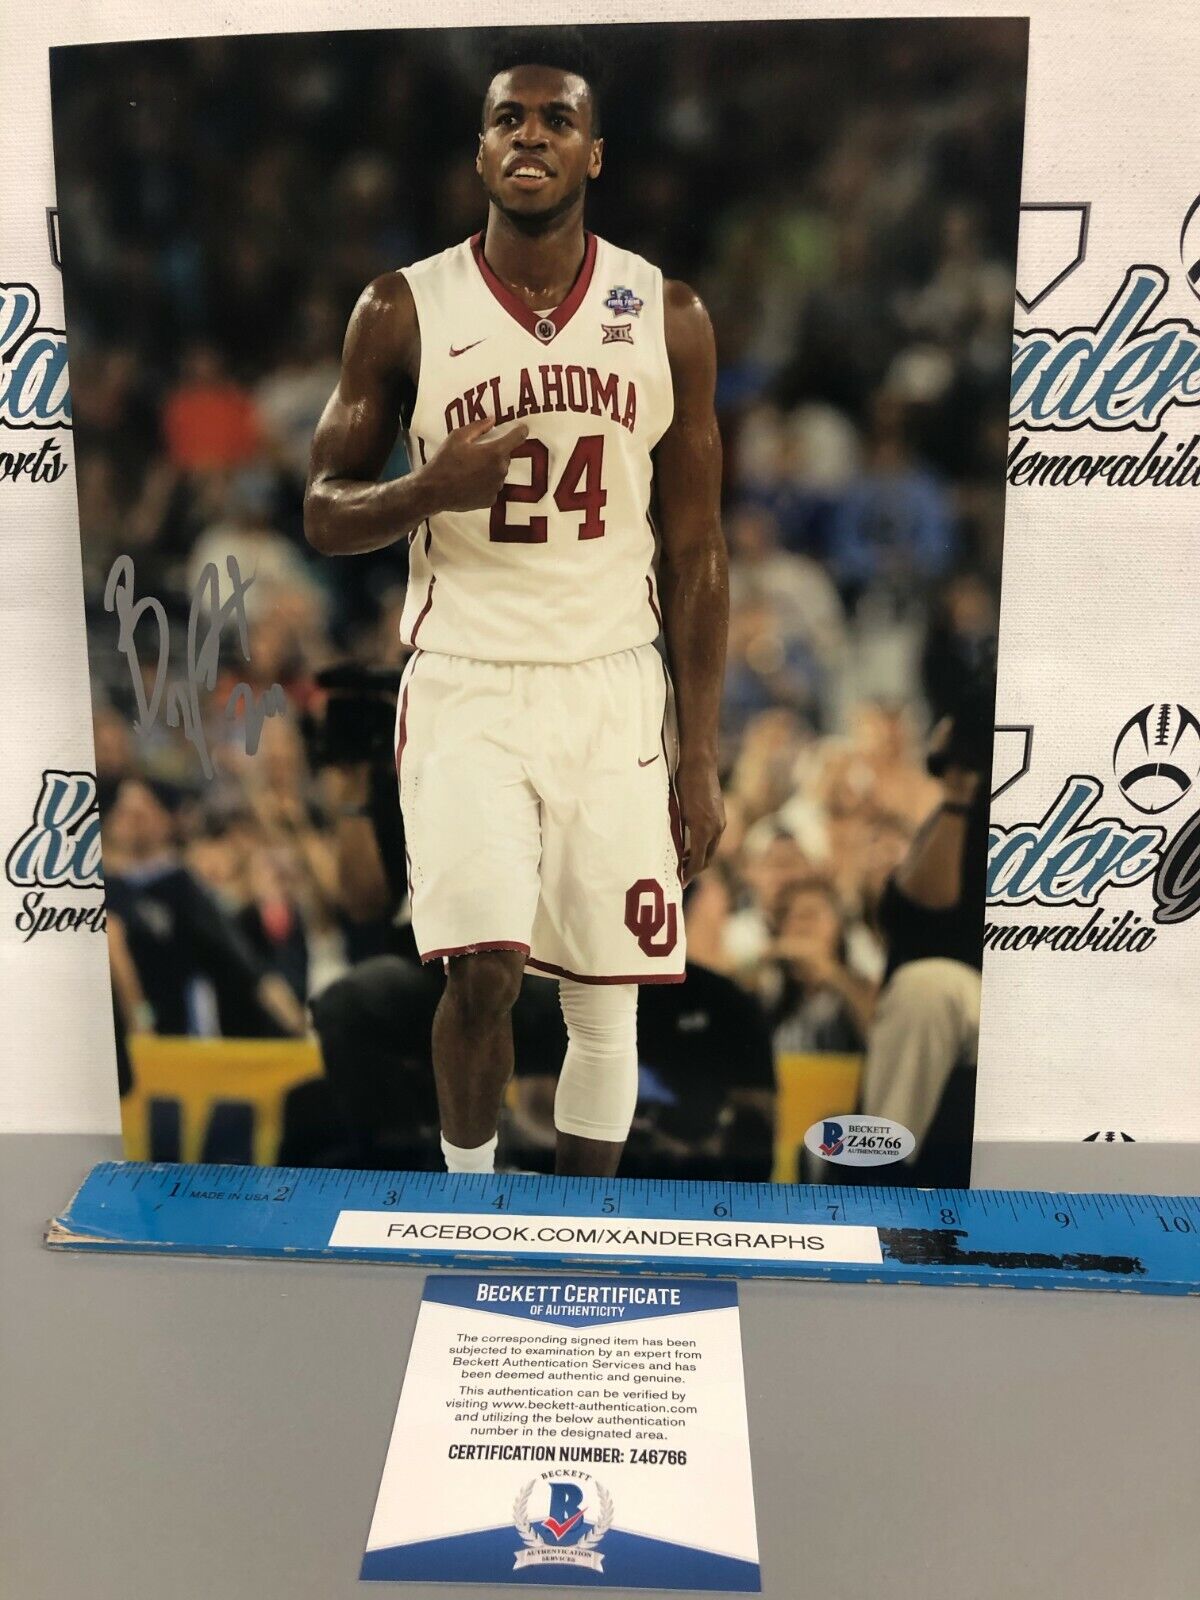 BUDDY HIELD SIGNED AUTOGRAPHED 8X10 BASKETBALL Photo Poster paintingGRAPH-BECKETT BAS COA